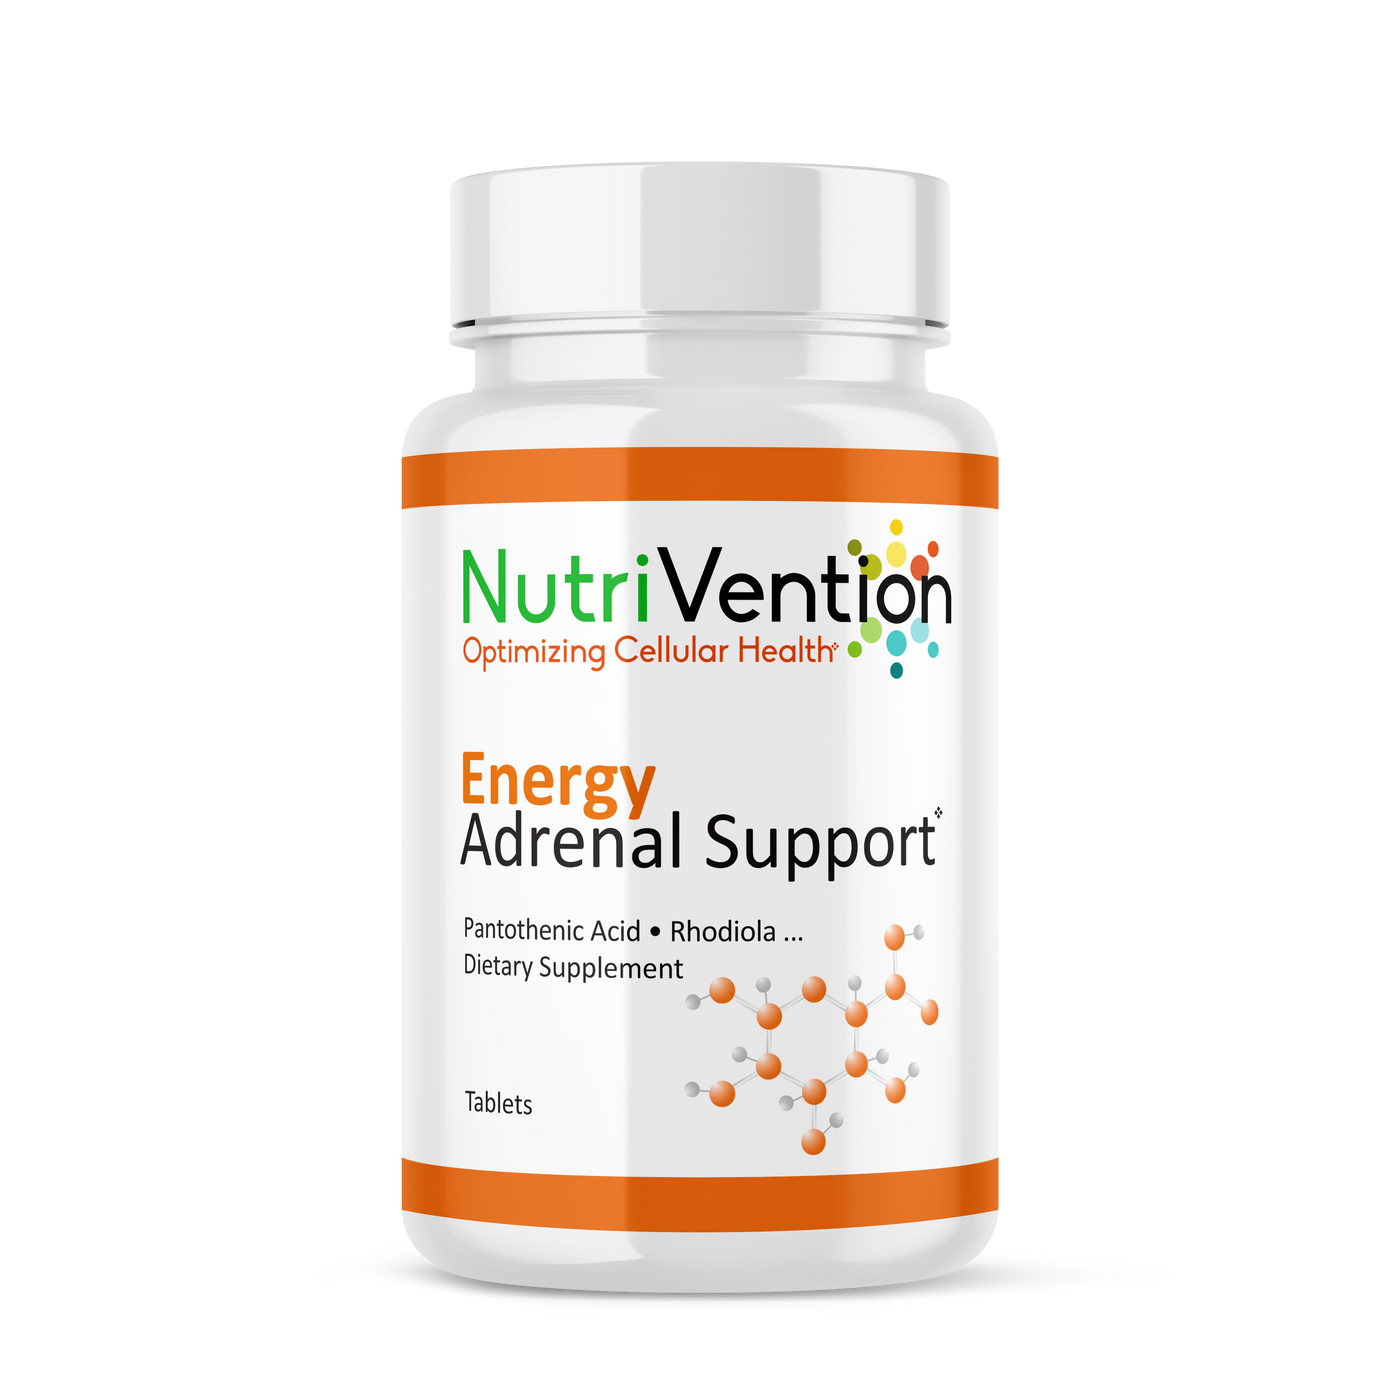 Energy Adrenal Support